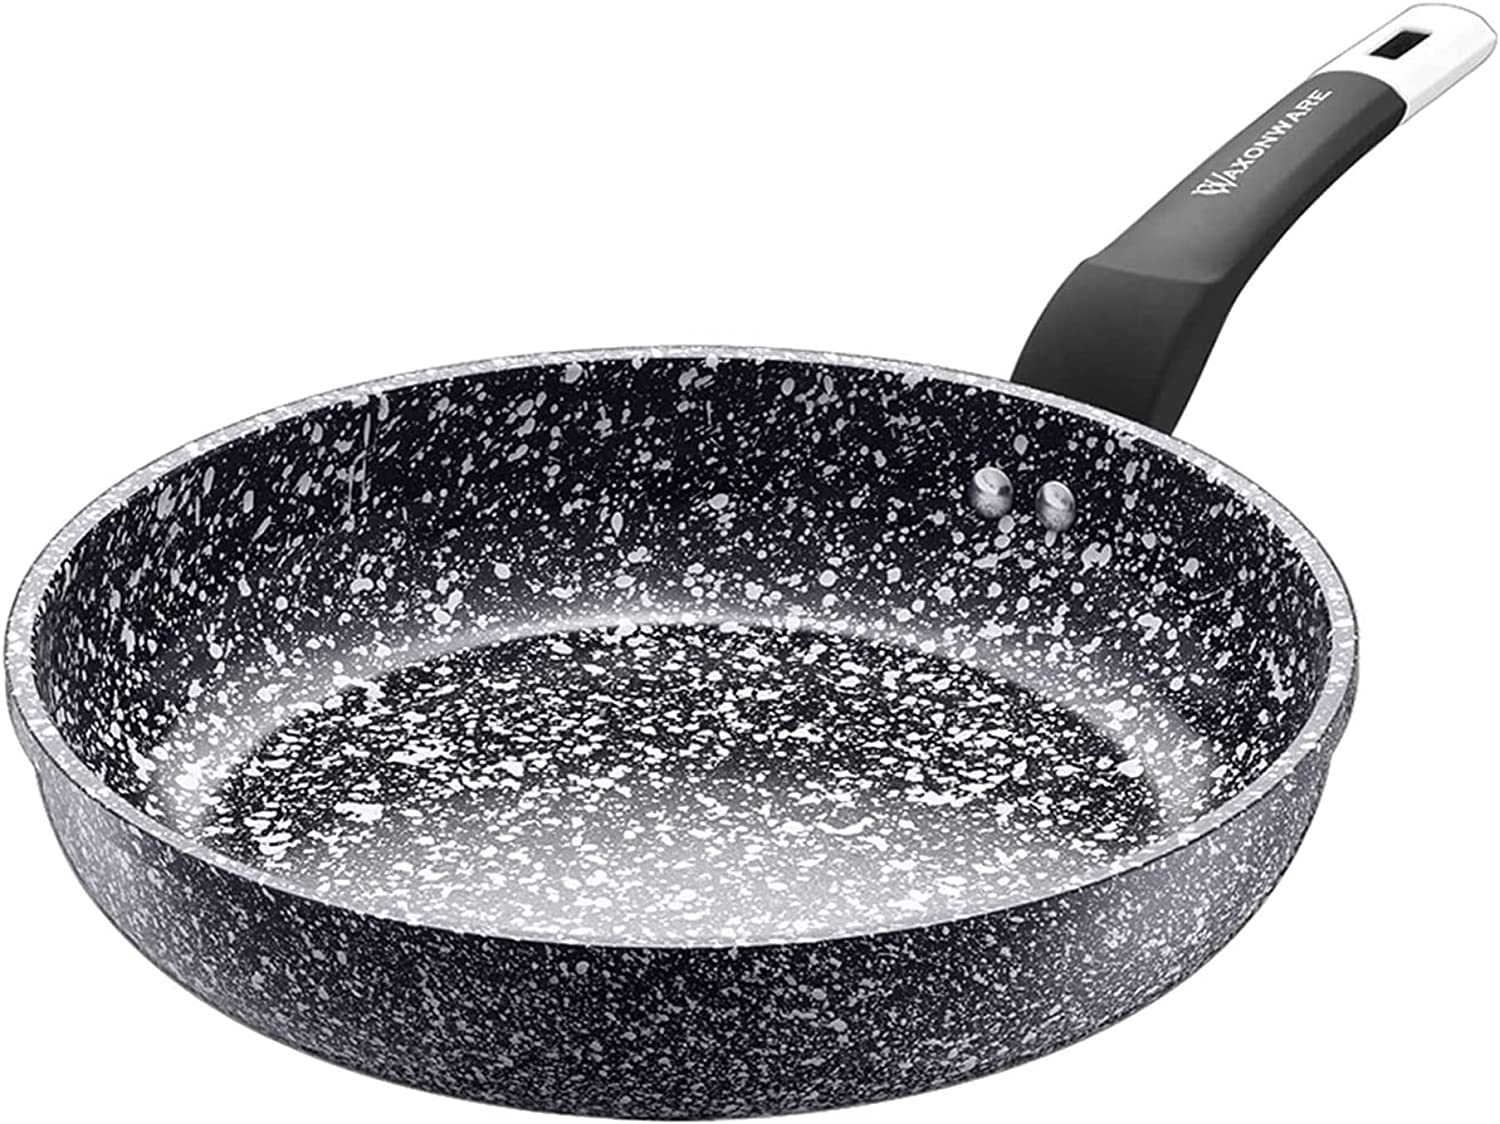 JEETEE 11 inch Nonstick Frying Pan, Stone Coating Cookware, Nonstick Omelette Pan with Heat-Resistant Handle, Induction Skillet for Eggs (Grey)